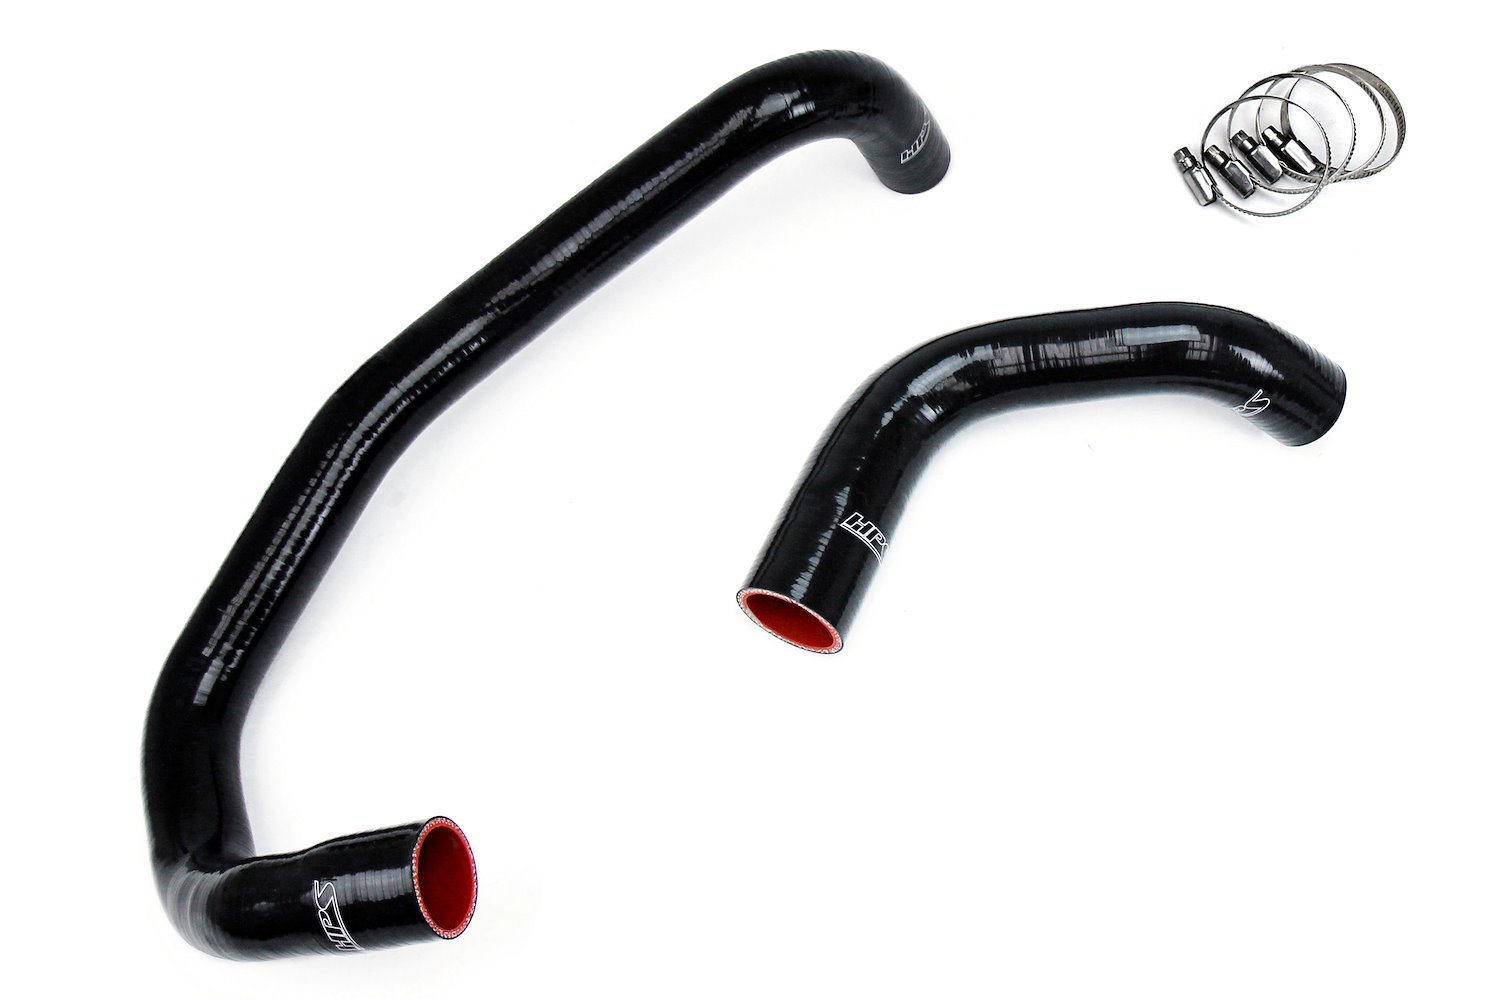 57-1326R-BLK Radiator Hose Kit, High-Temp 3-Ply Reinforced Silicone, Replaces OEM Rubber Radiator Coolant Hoses